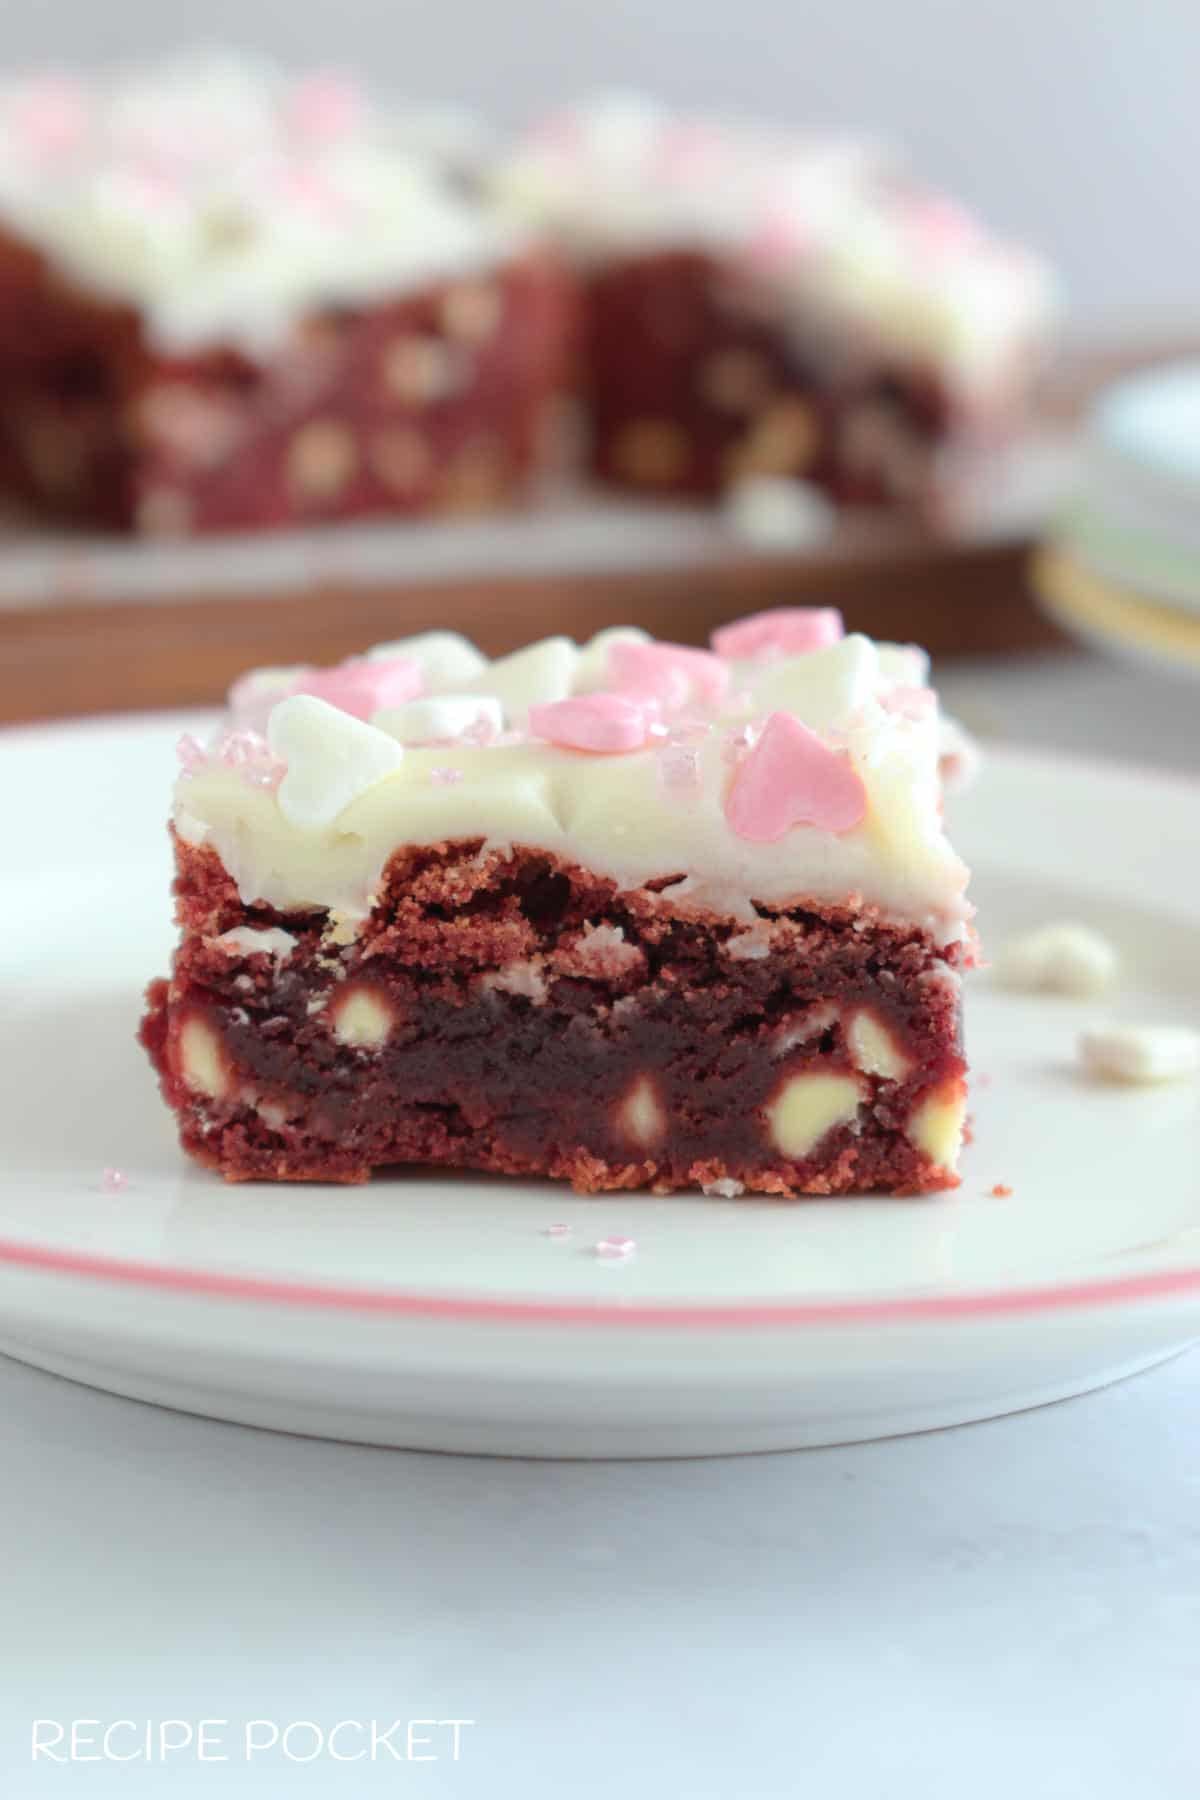 A red velvet brownie with white chocolate chips.